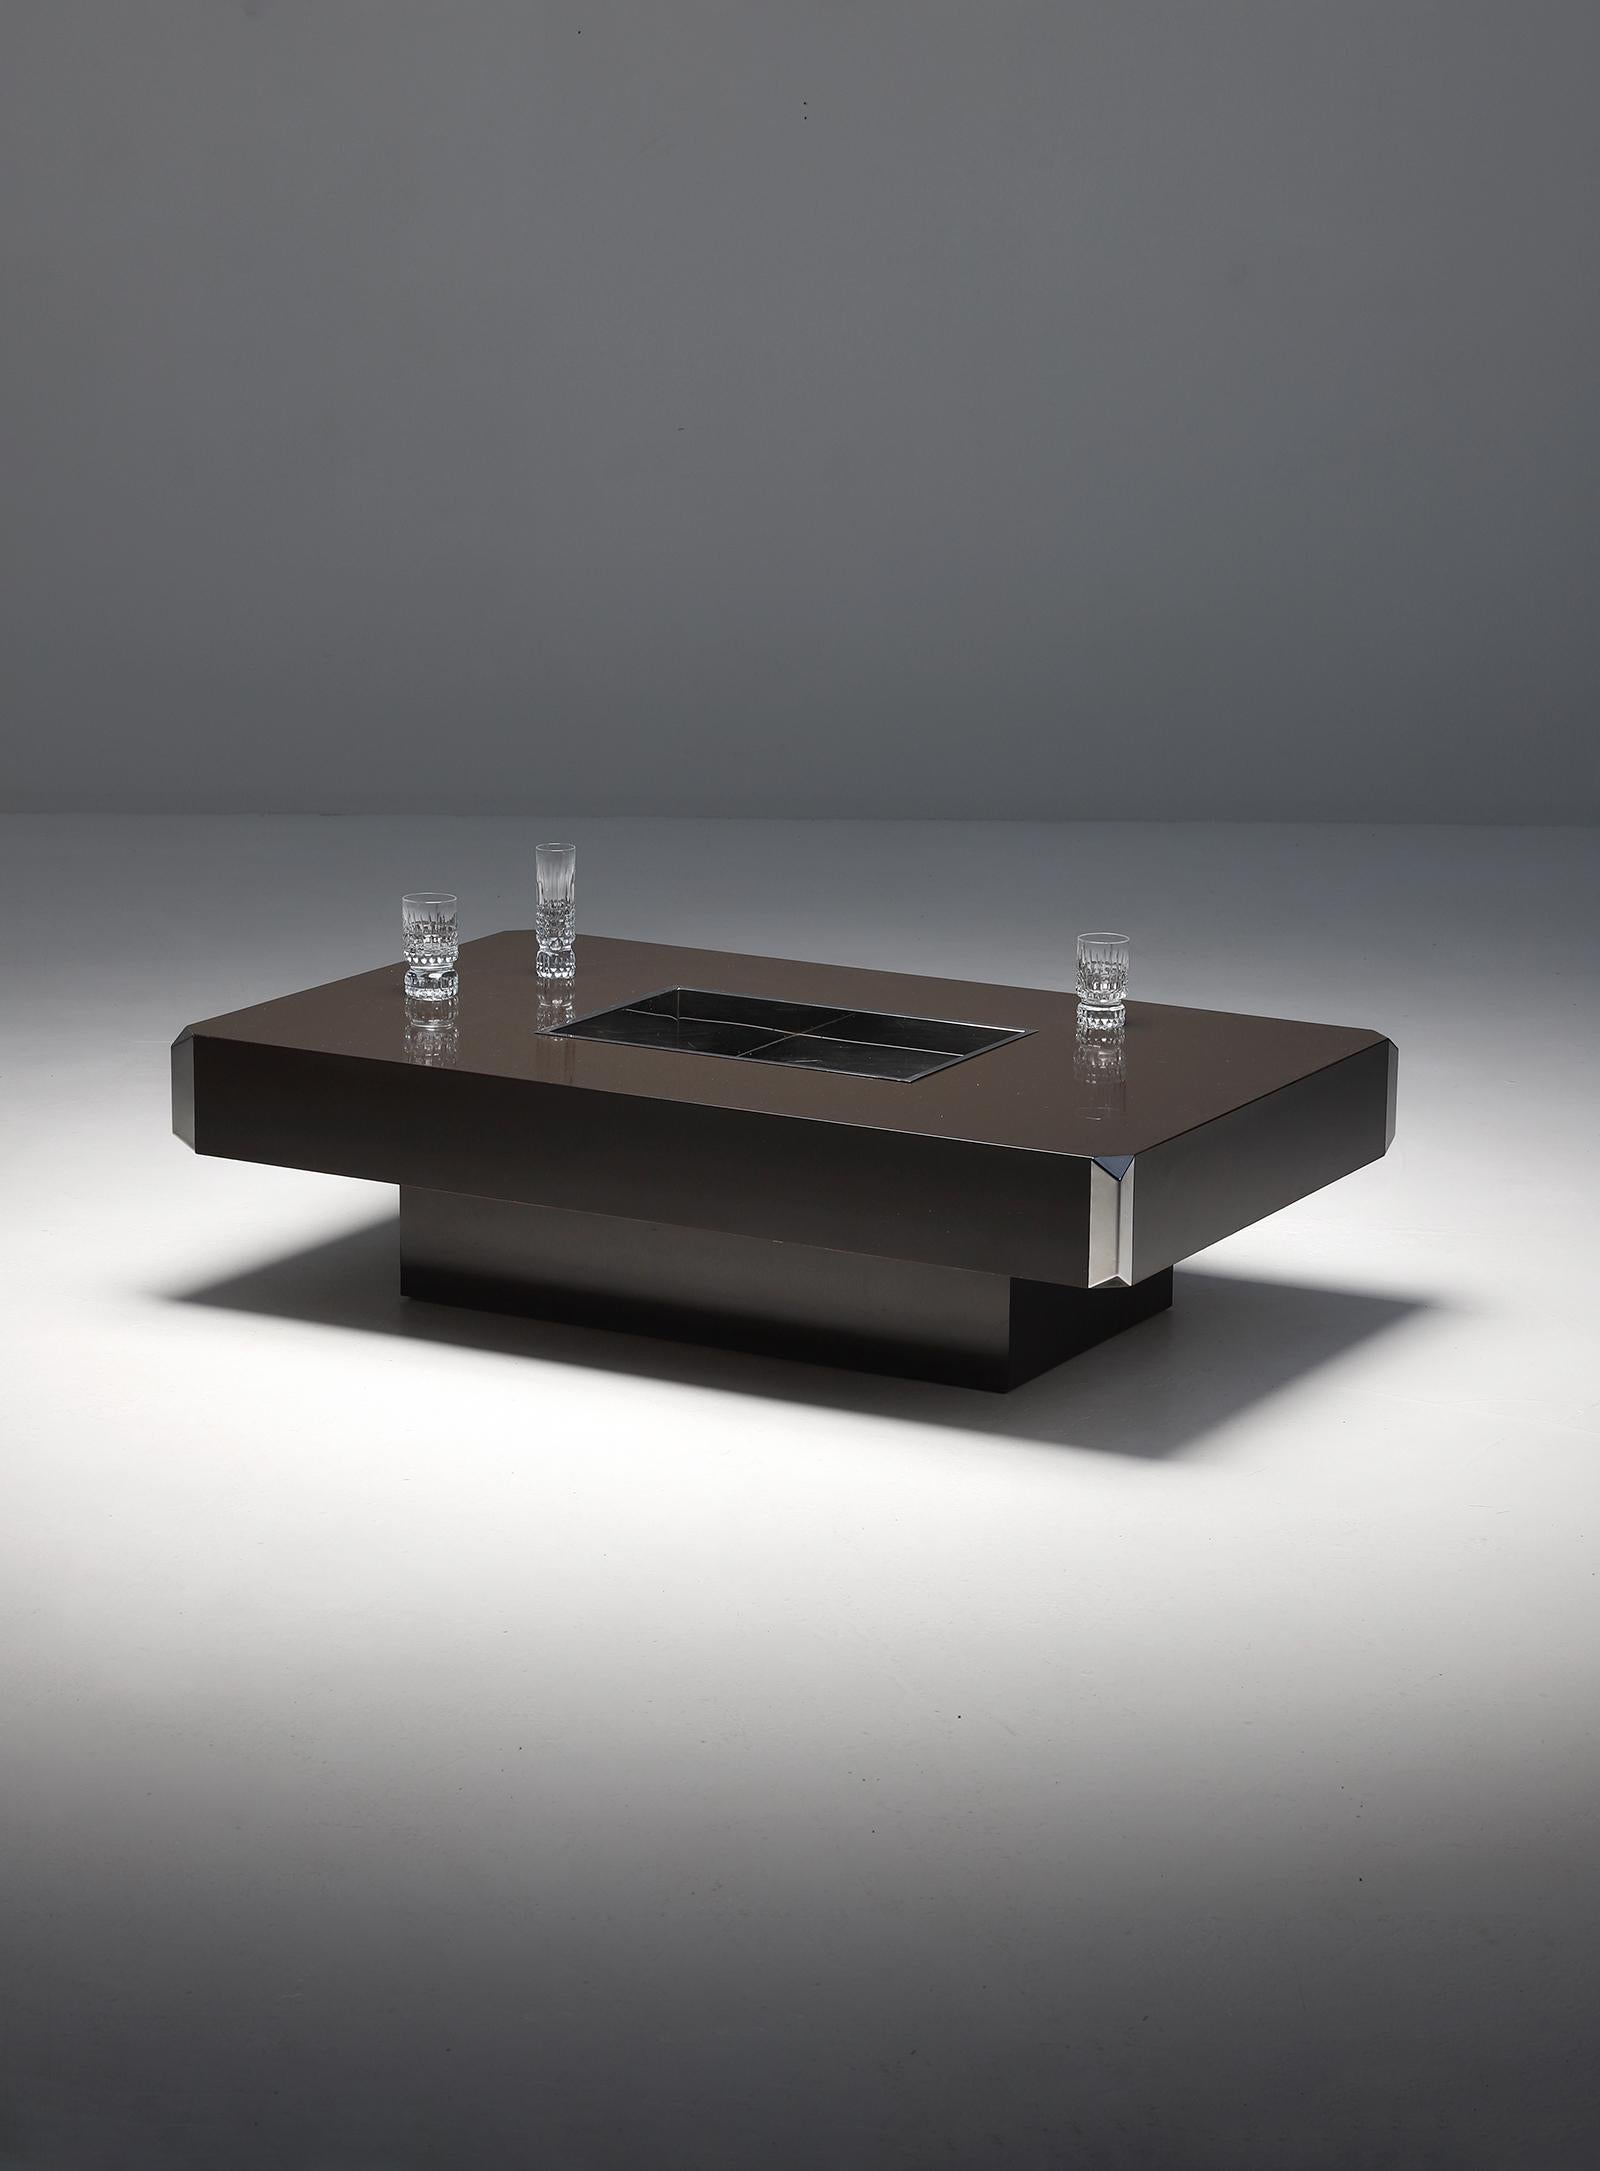 Decorative Alveo coffee table designed by Willy Rizzo for Mario Sabot in 1972. The table is made out of a dark brown colored laminated wood with chrome corners. The middle of the table has a central chrome box that can be used as a bar or a place